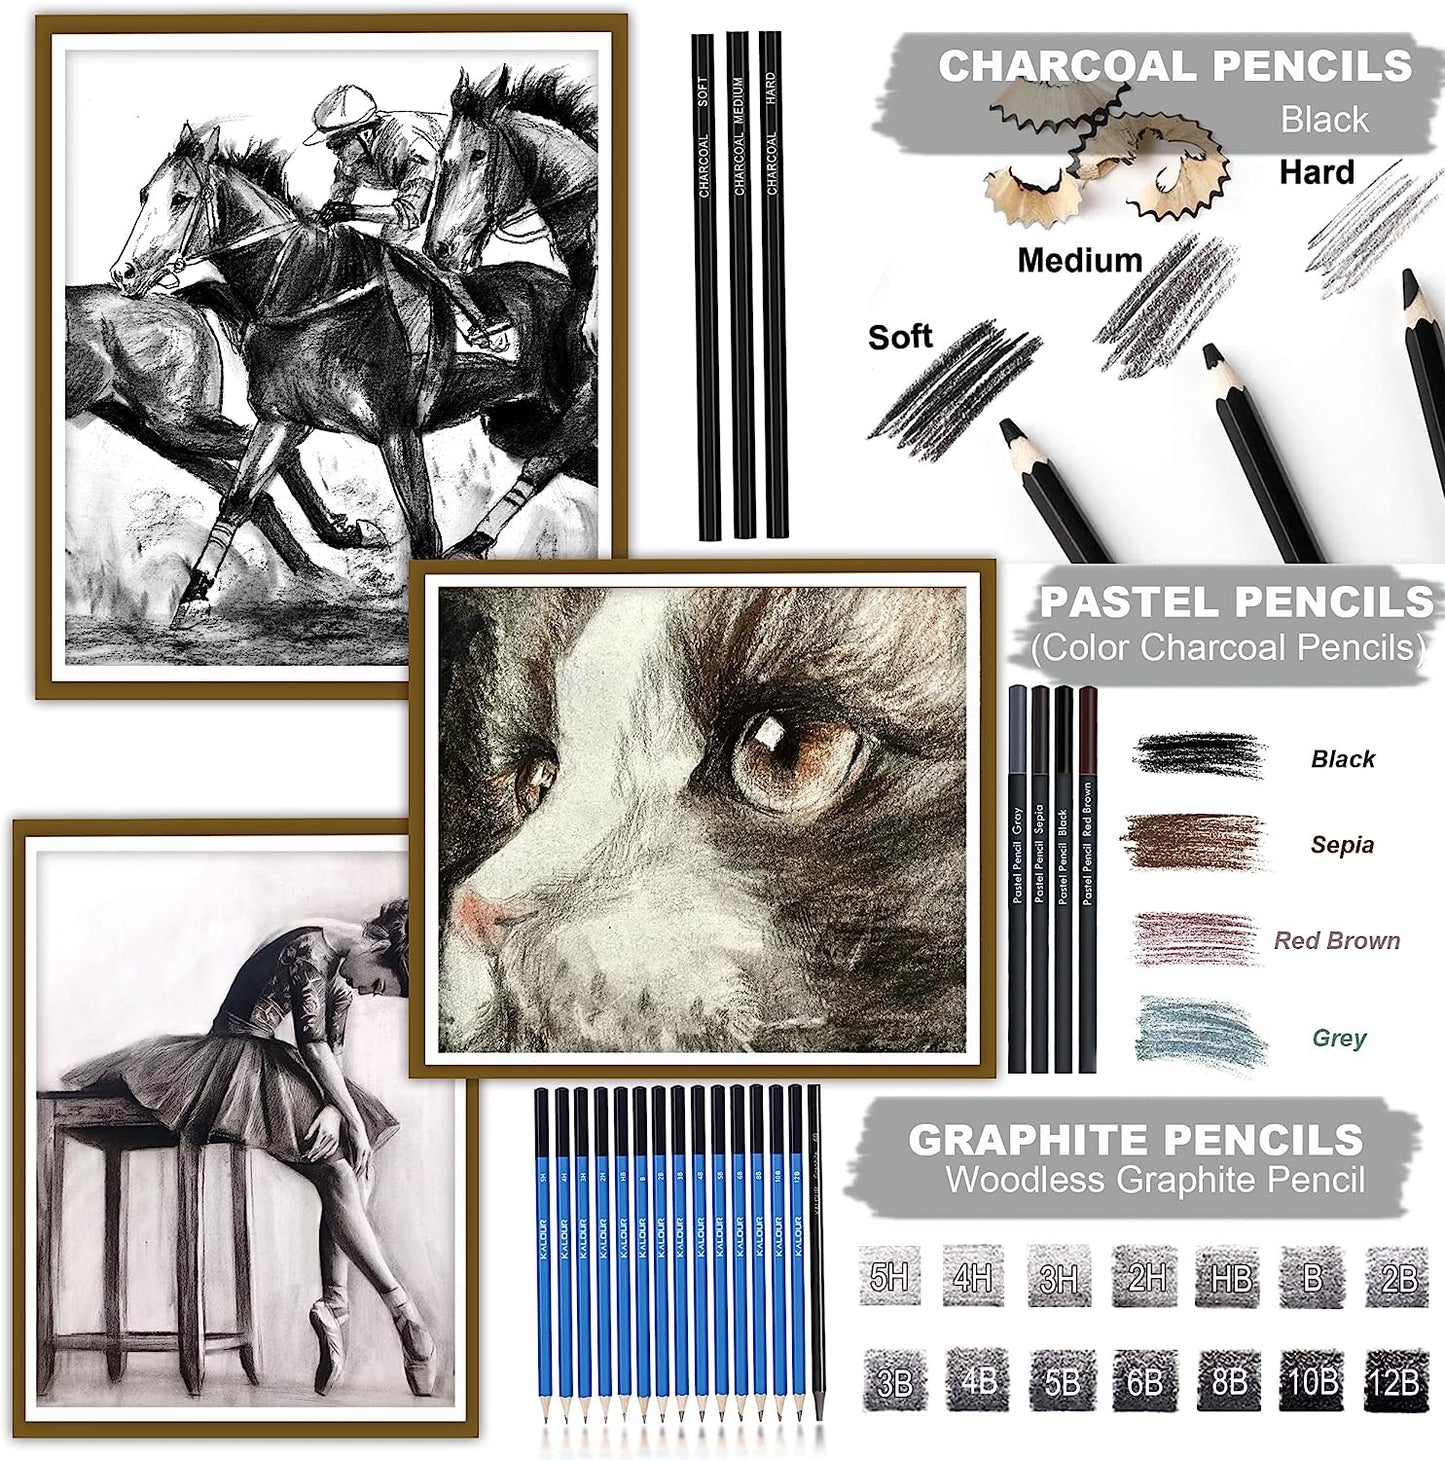 KALOUR 33 Pieces Pro Drawing Kit Sketching Pencils Set,Portable Zippered  Travel Case-Charcoal Pencils, Sketch Pencils, Charcoal  Stick,Sharpener,Eraser.Art Supplies for Artists Beginner Adults Teens